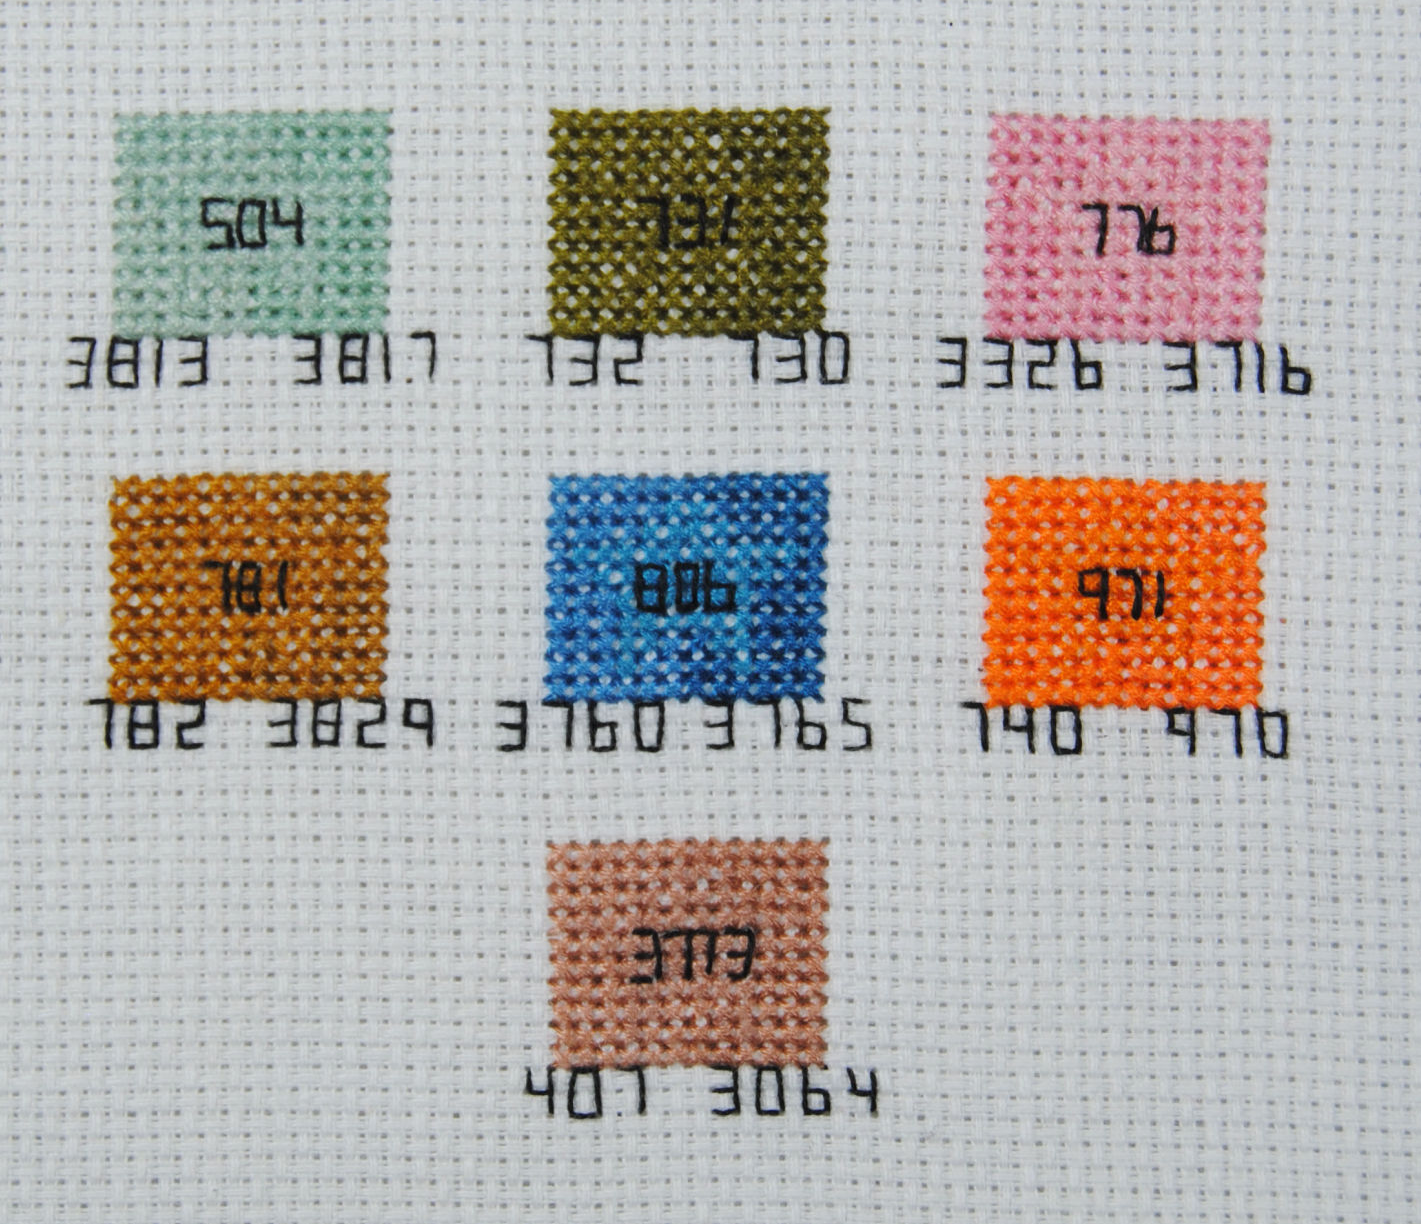 Stitching with Variegated Threads, Part II: Controlled Shades